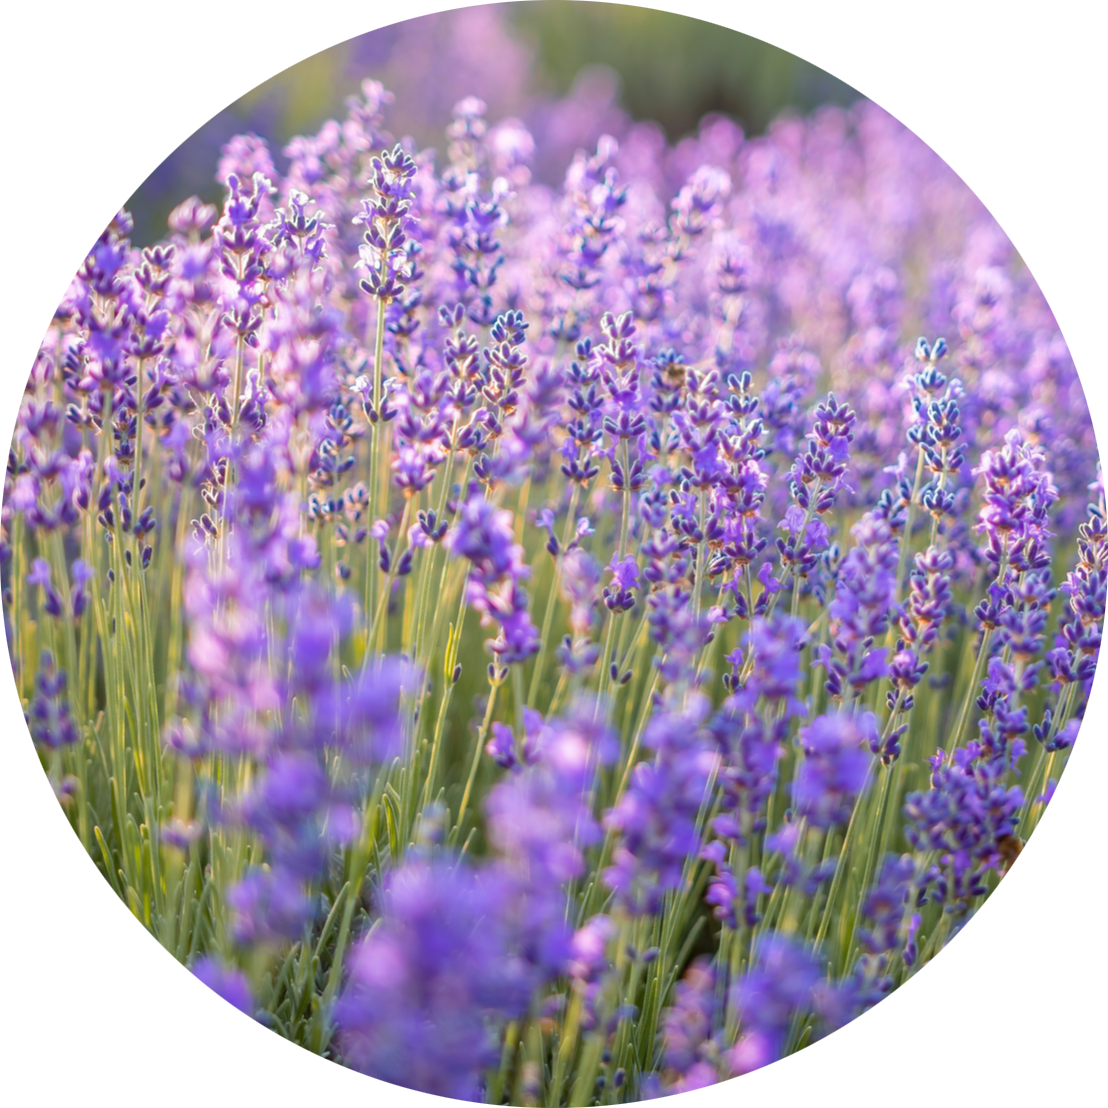 A field of lavender